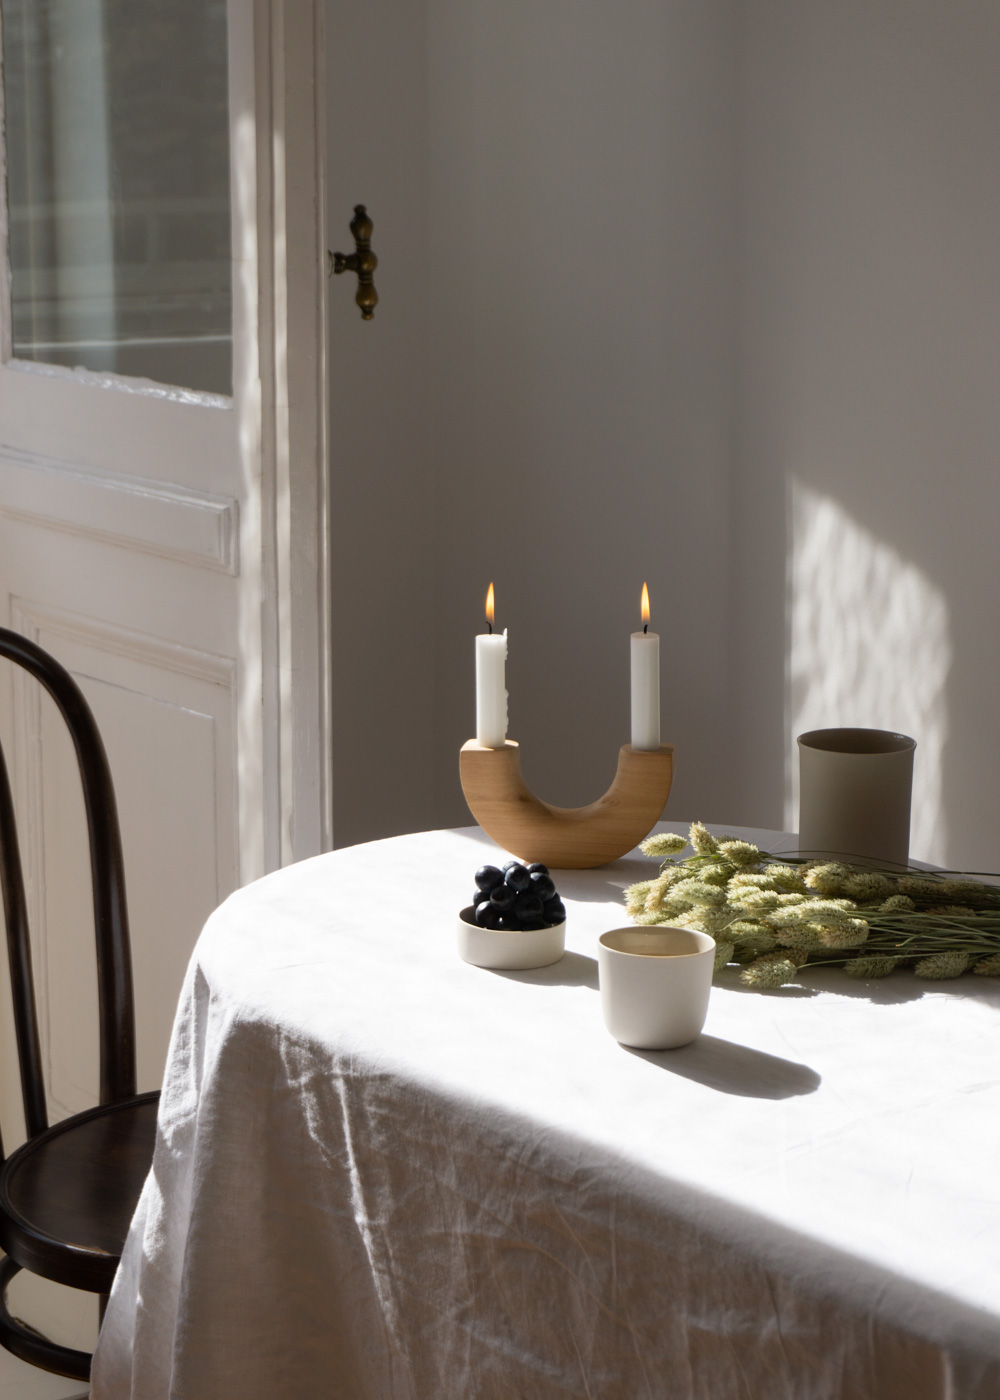 Foresta Arco Candle Holder, KleoCo. Ceramics ~ Table Setting, Slow Living, Simple For Everyday, Ethical Sustainable Brand, Fair Trade Design | Minimalist Home, Scandinavian Design, Sustainable Home, Natural Aesthetic | Product Photography, Light and Shadows, Danish Design Interior | RG Daily Blog